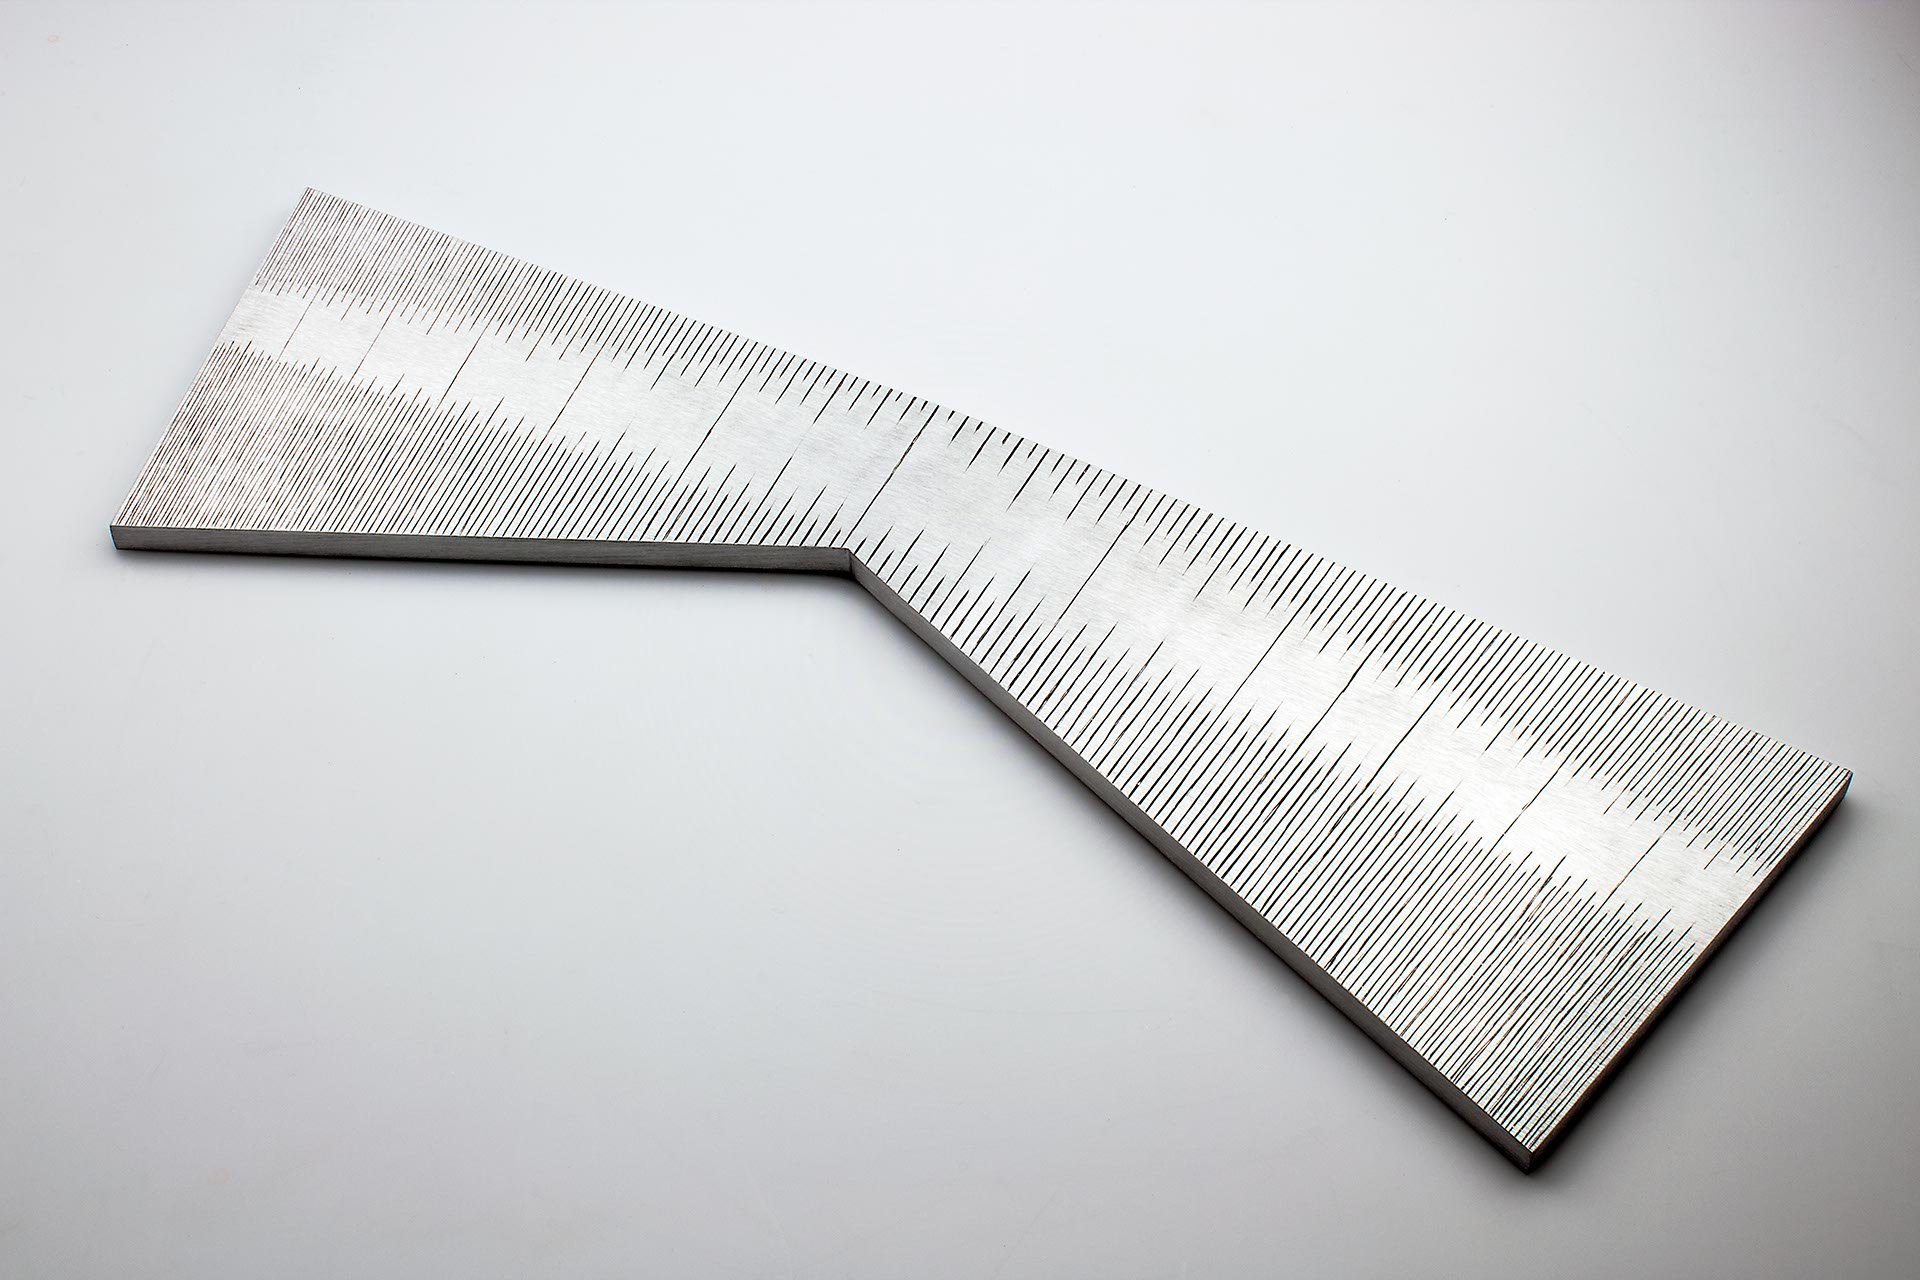 Instrument #29, 12.75" x 3.875" x .25", hand engraved aluminum and ink.